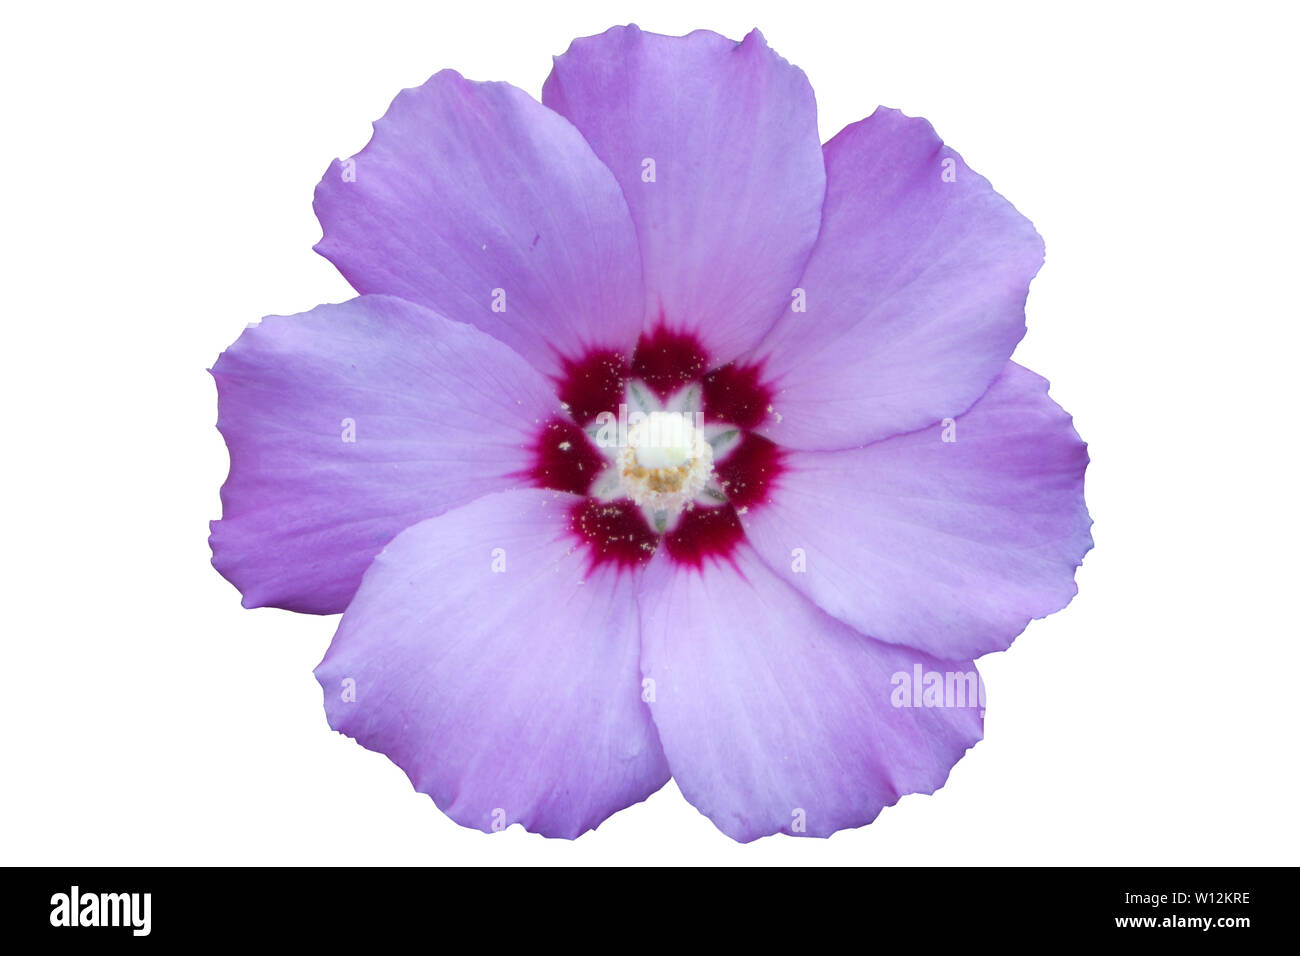 Syrian ketmia pale violet with deep red centre rose of Sharon 'Hamabo' flower isolated on white. Stock Photo